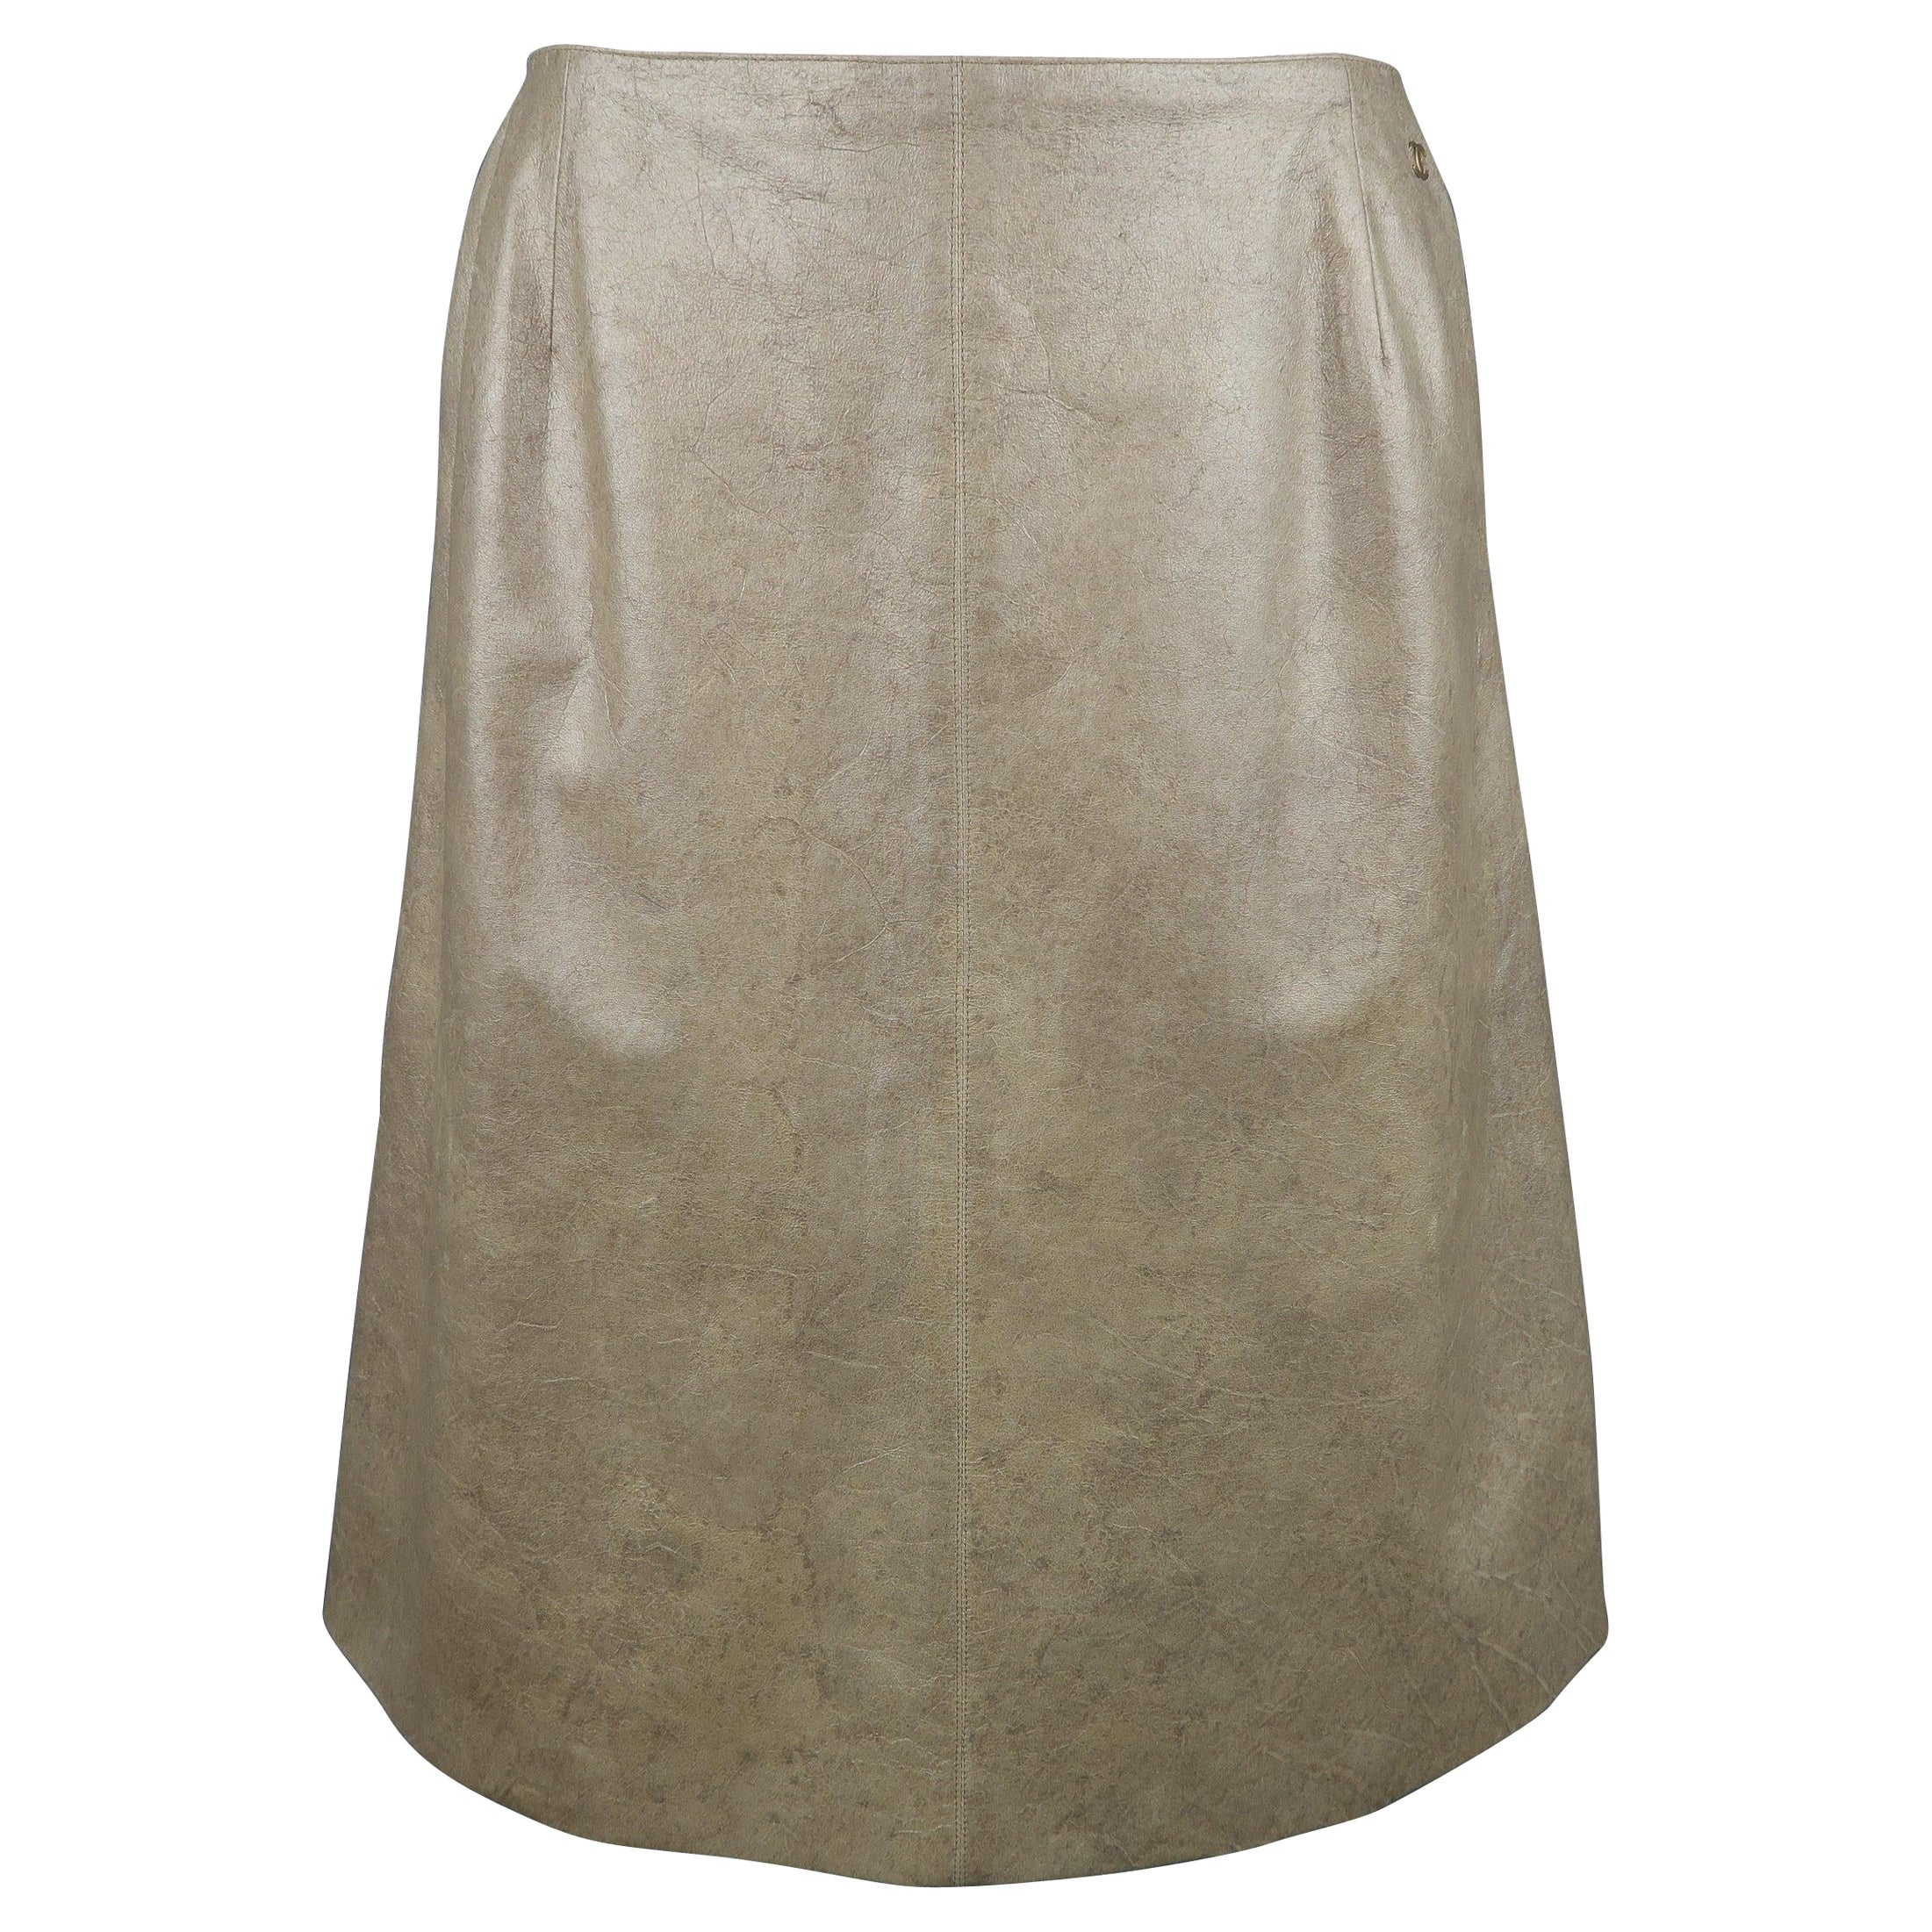 CHANEL Size 8 Metallic Gold Marbled Leather A Line Skirt For Sale